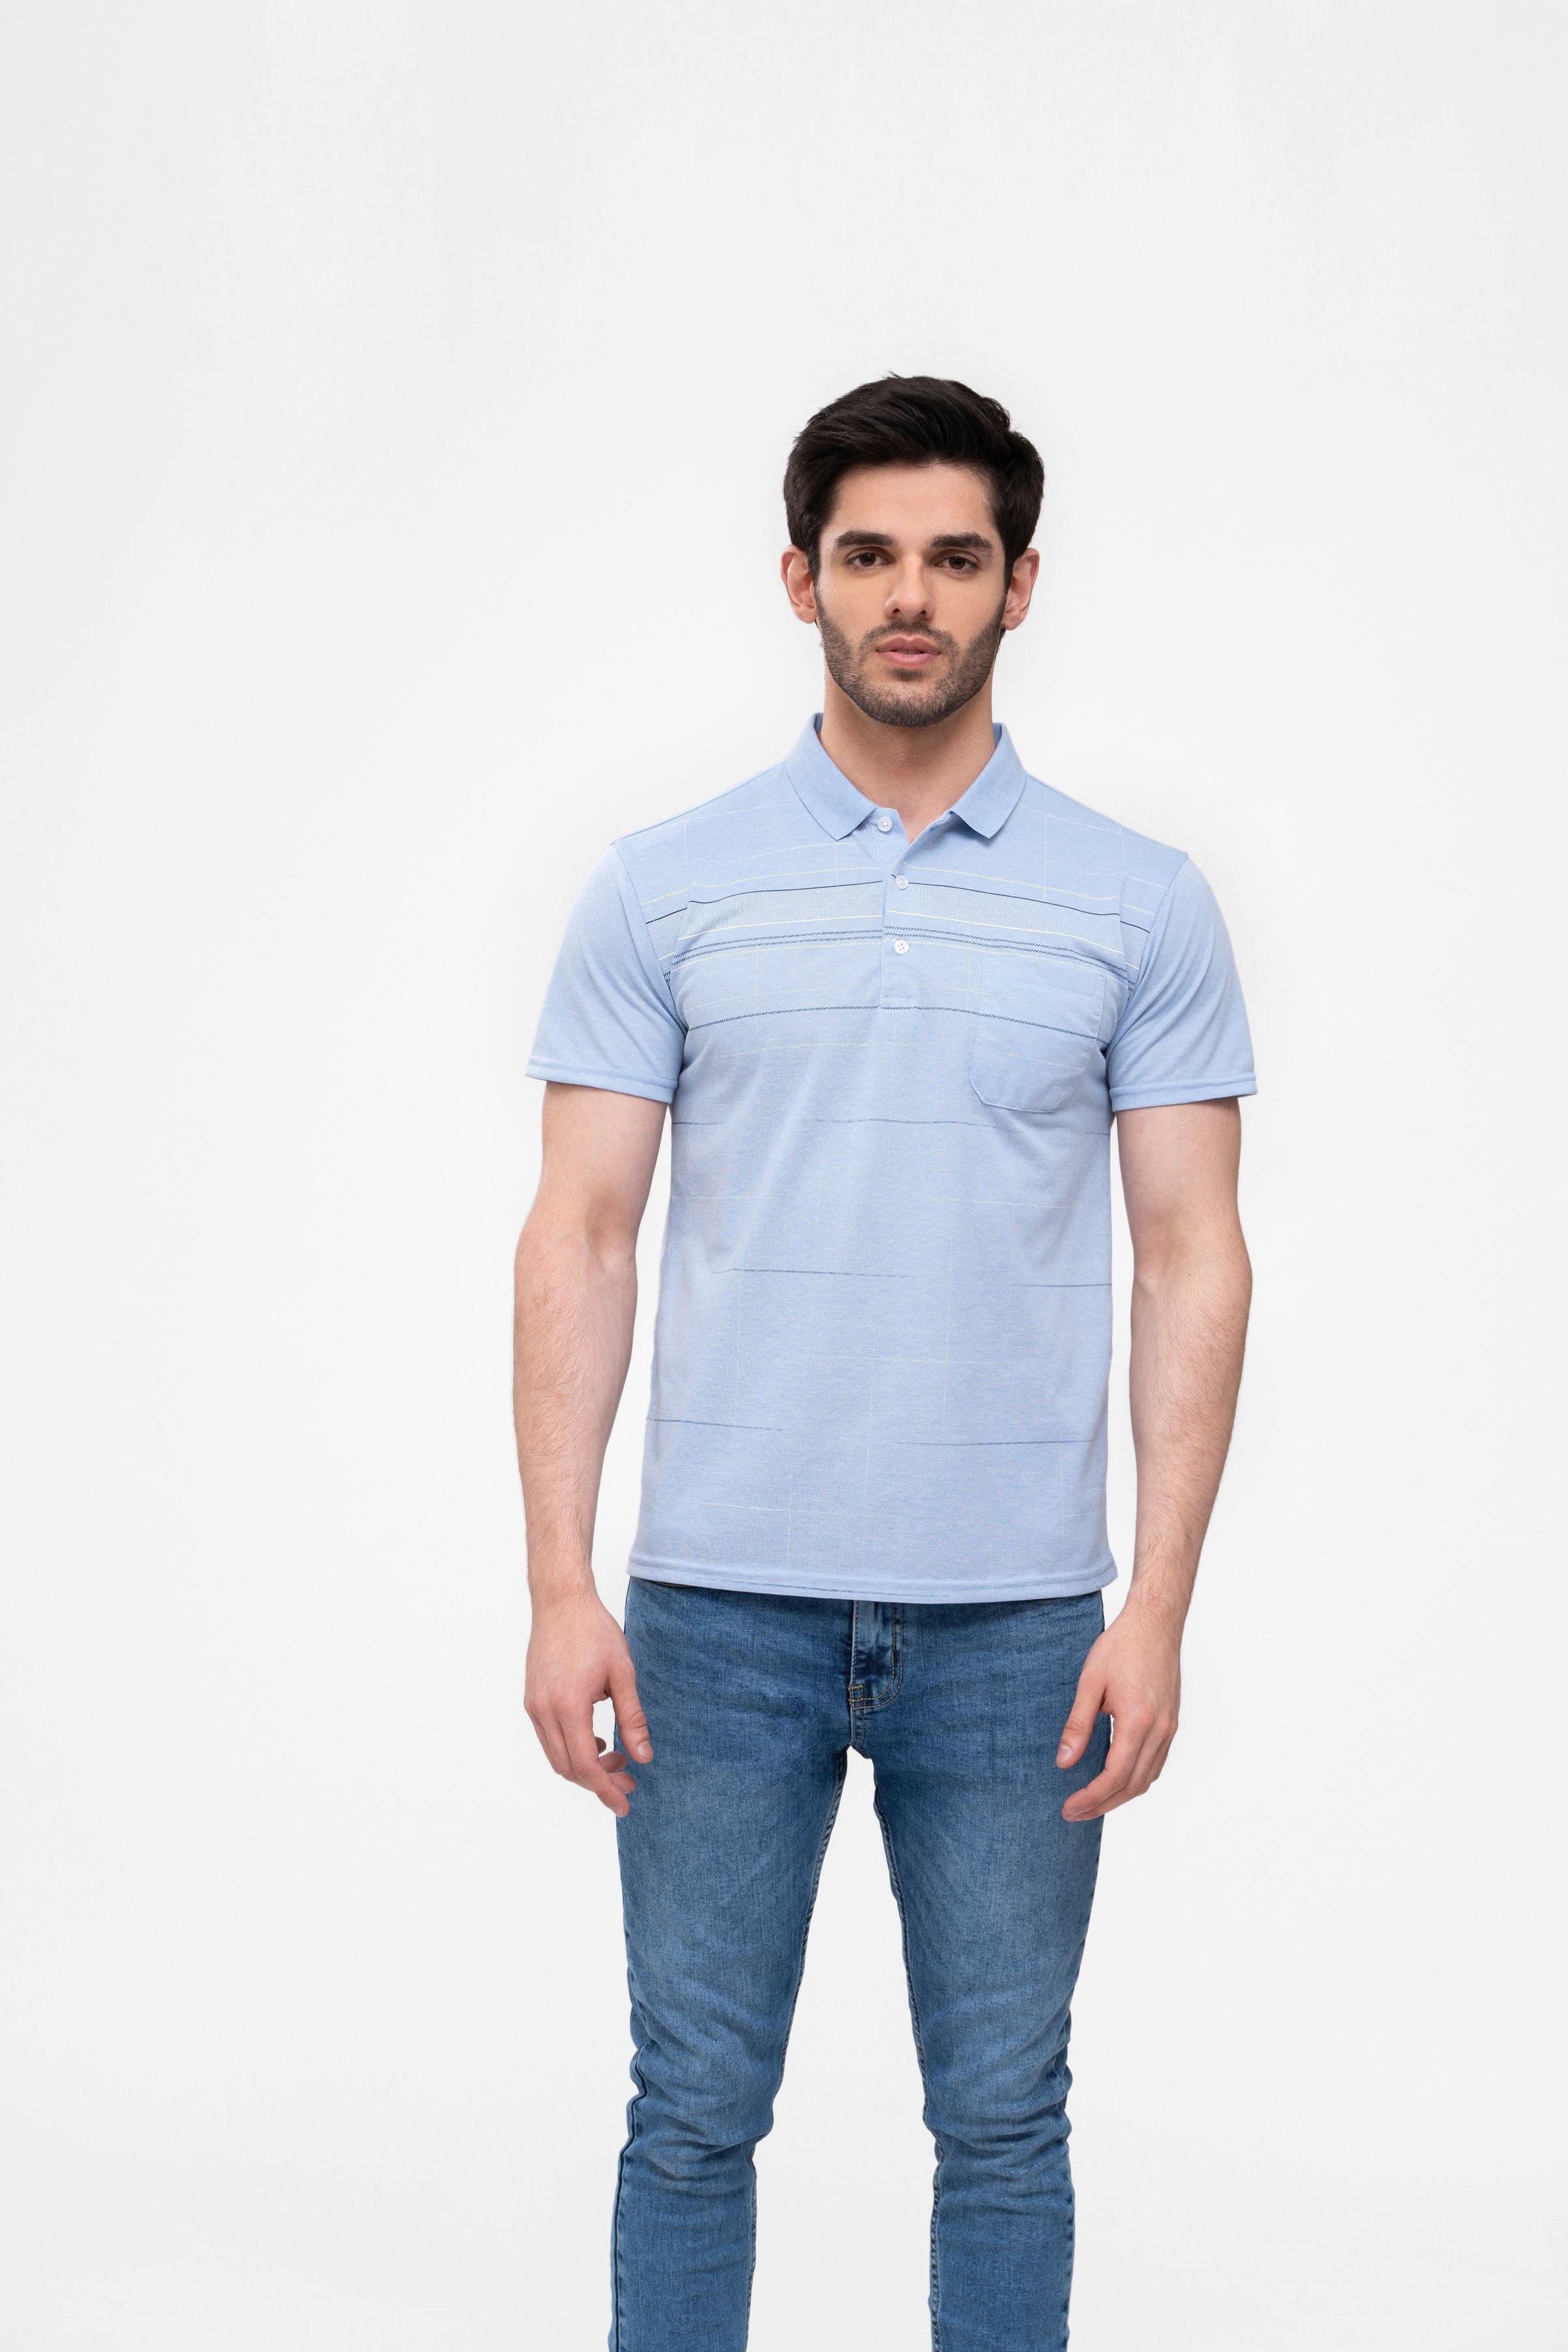 POLO SHIRT SKY BLUE at Charcoal Clothing